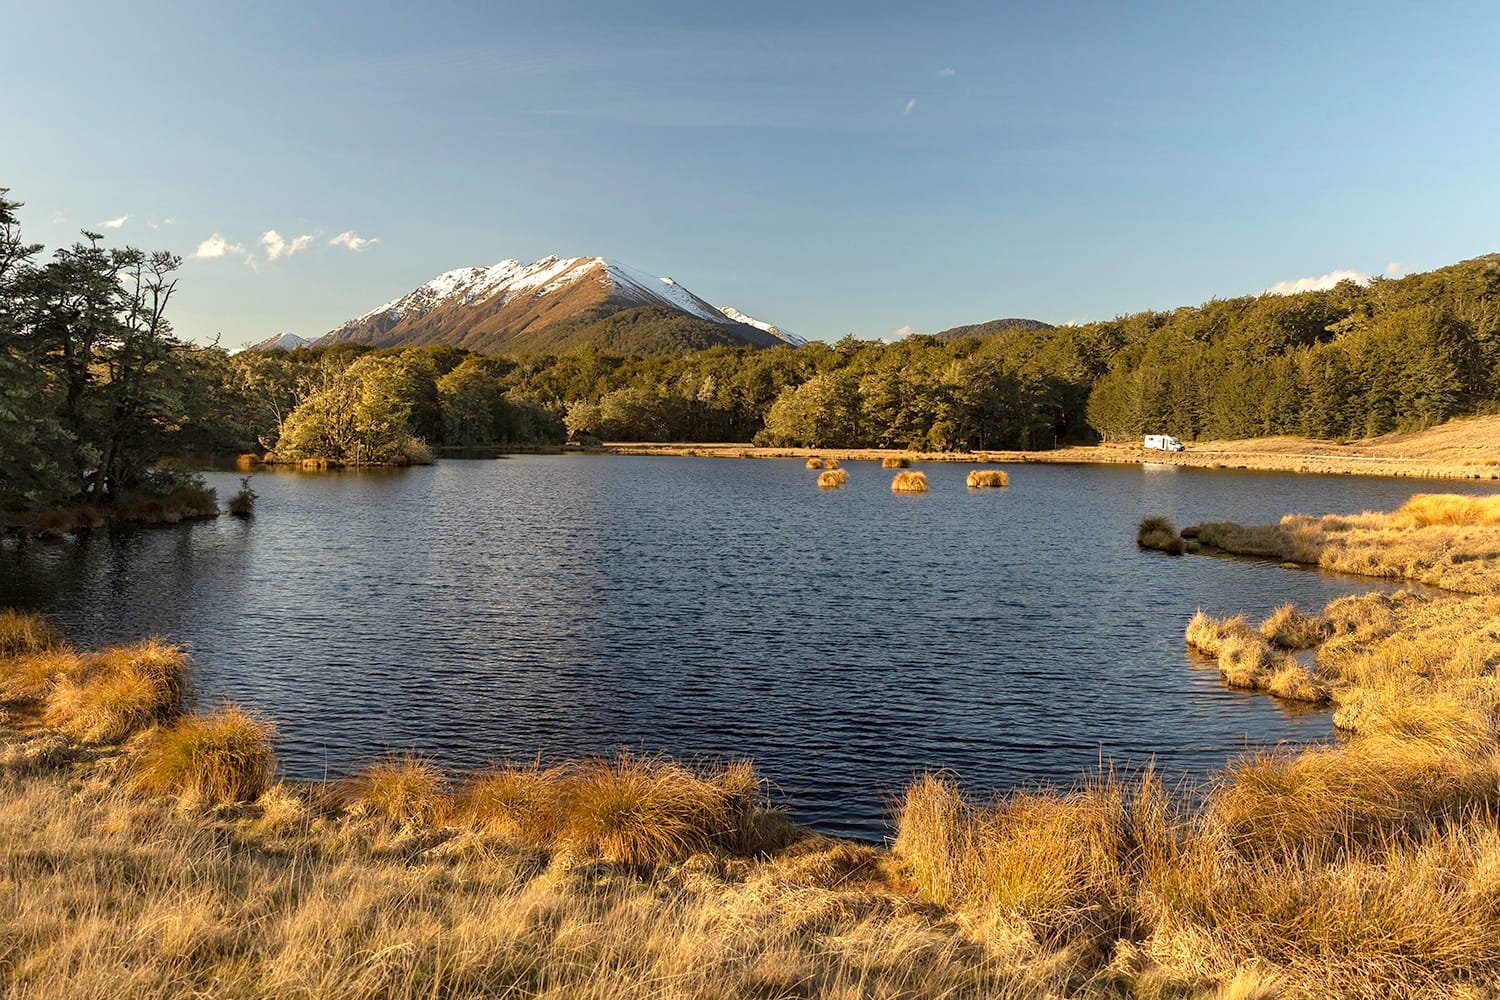 Little Mavora Lake in the south of the South Island of New Zealand with a white motorhome on the far shore with mountains in the background